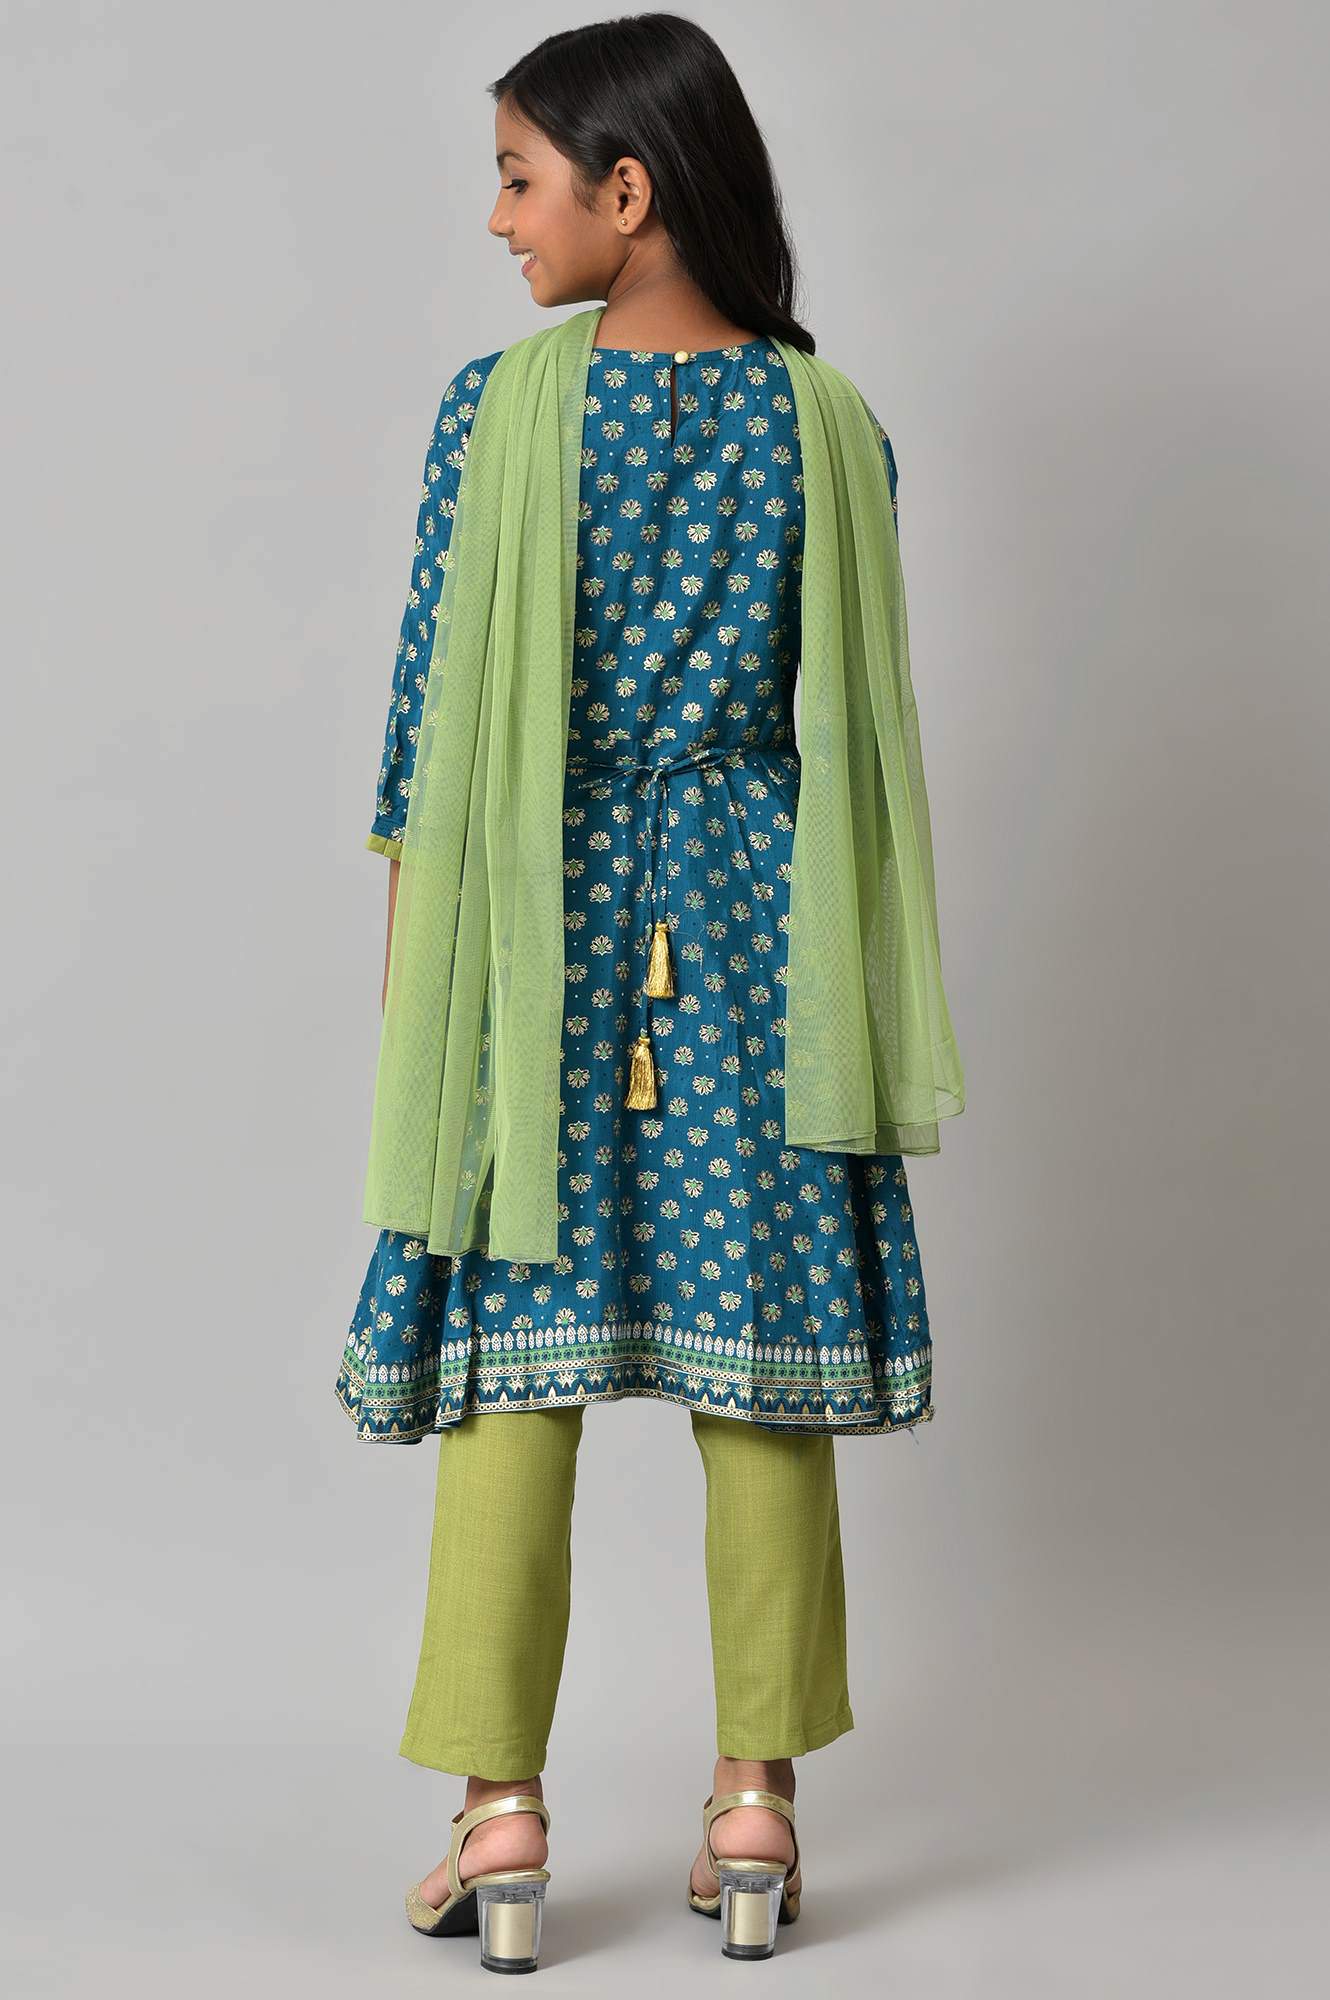 LIVA Girls Blue Floral Printed kurta with Green Trousers and Dupatta